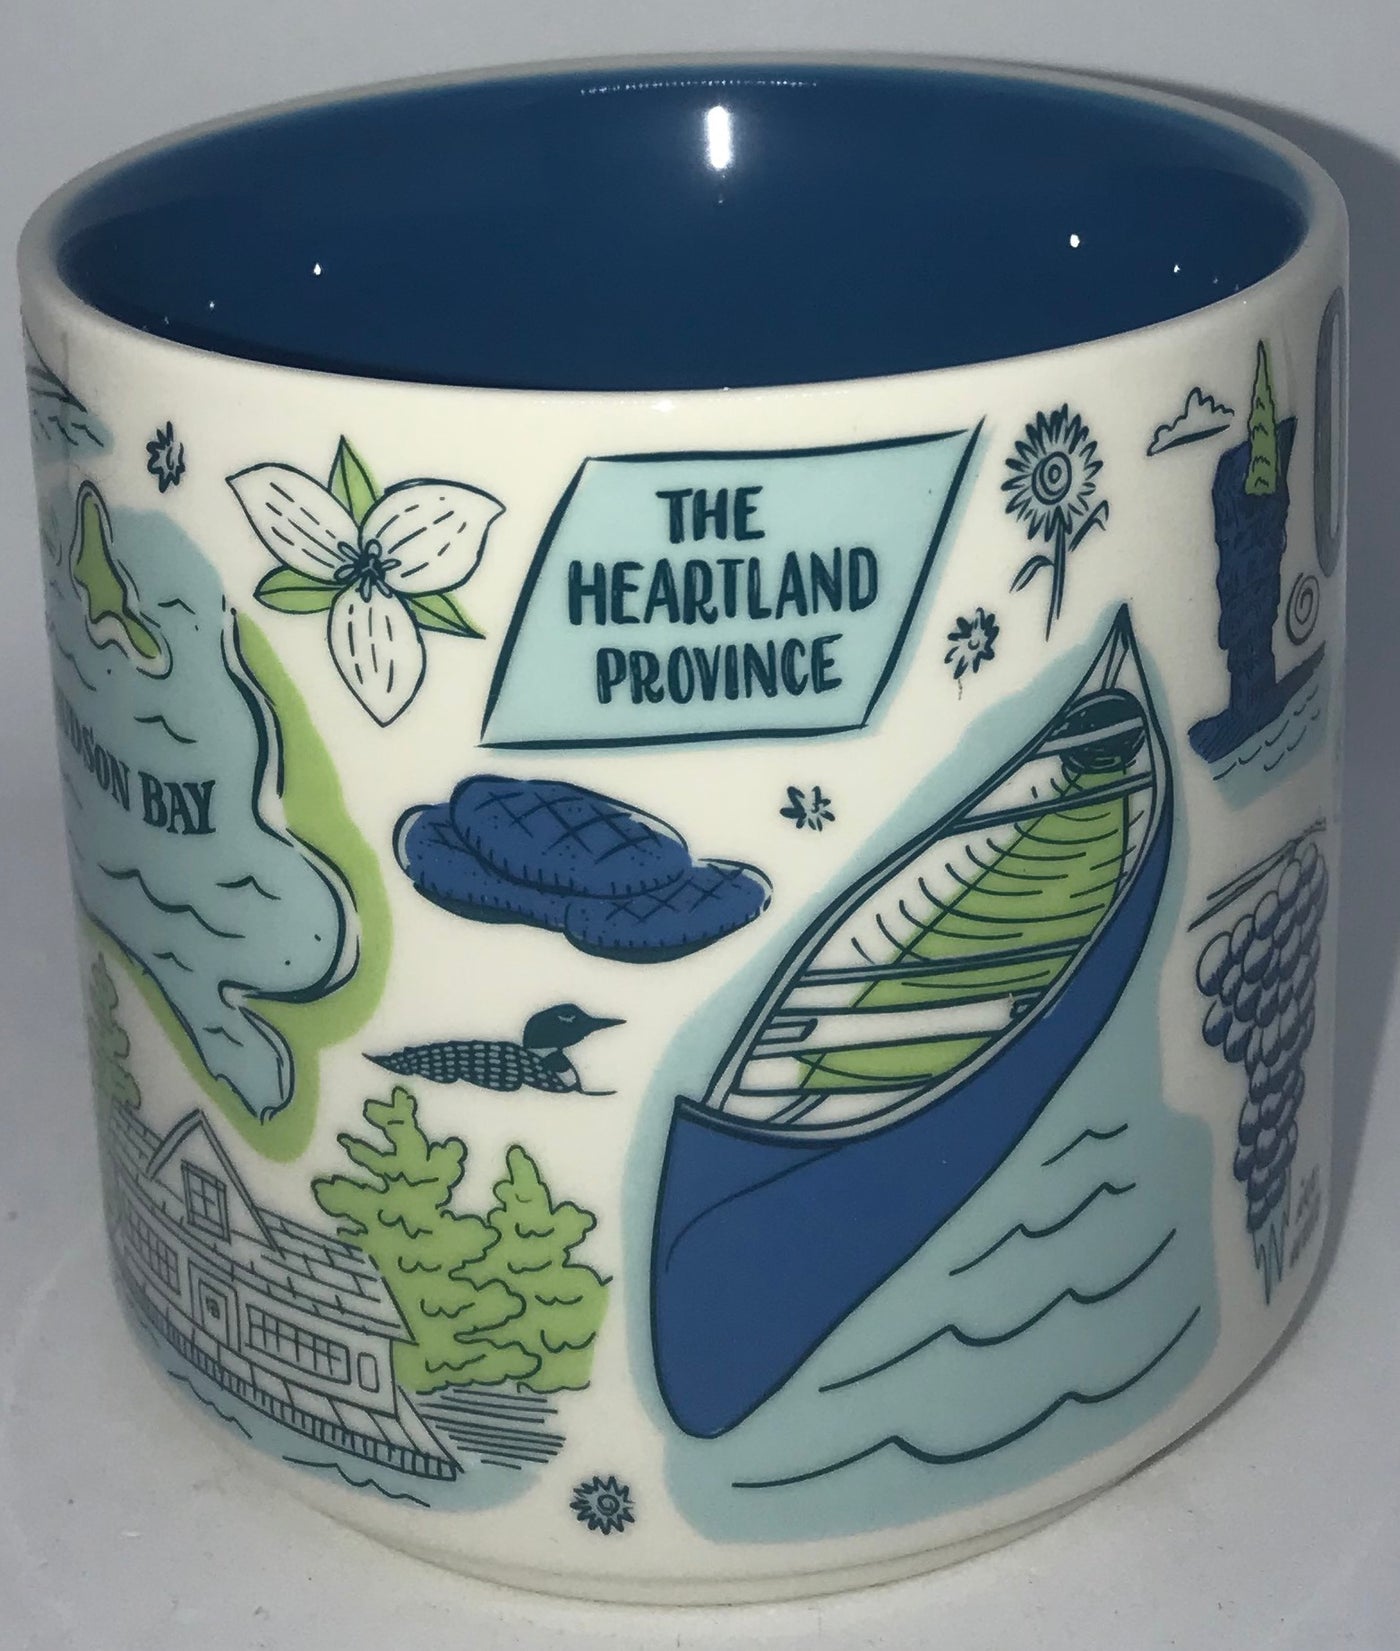 Starbucks Been There Series Collection Canada Ontario Coffee Mug New With Box